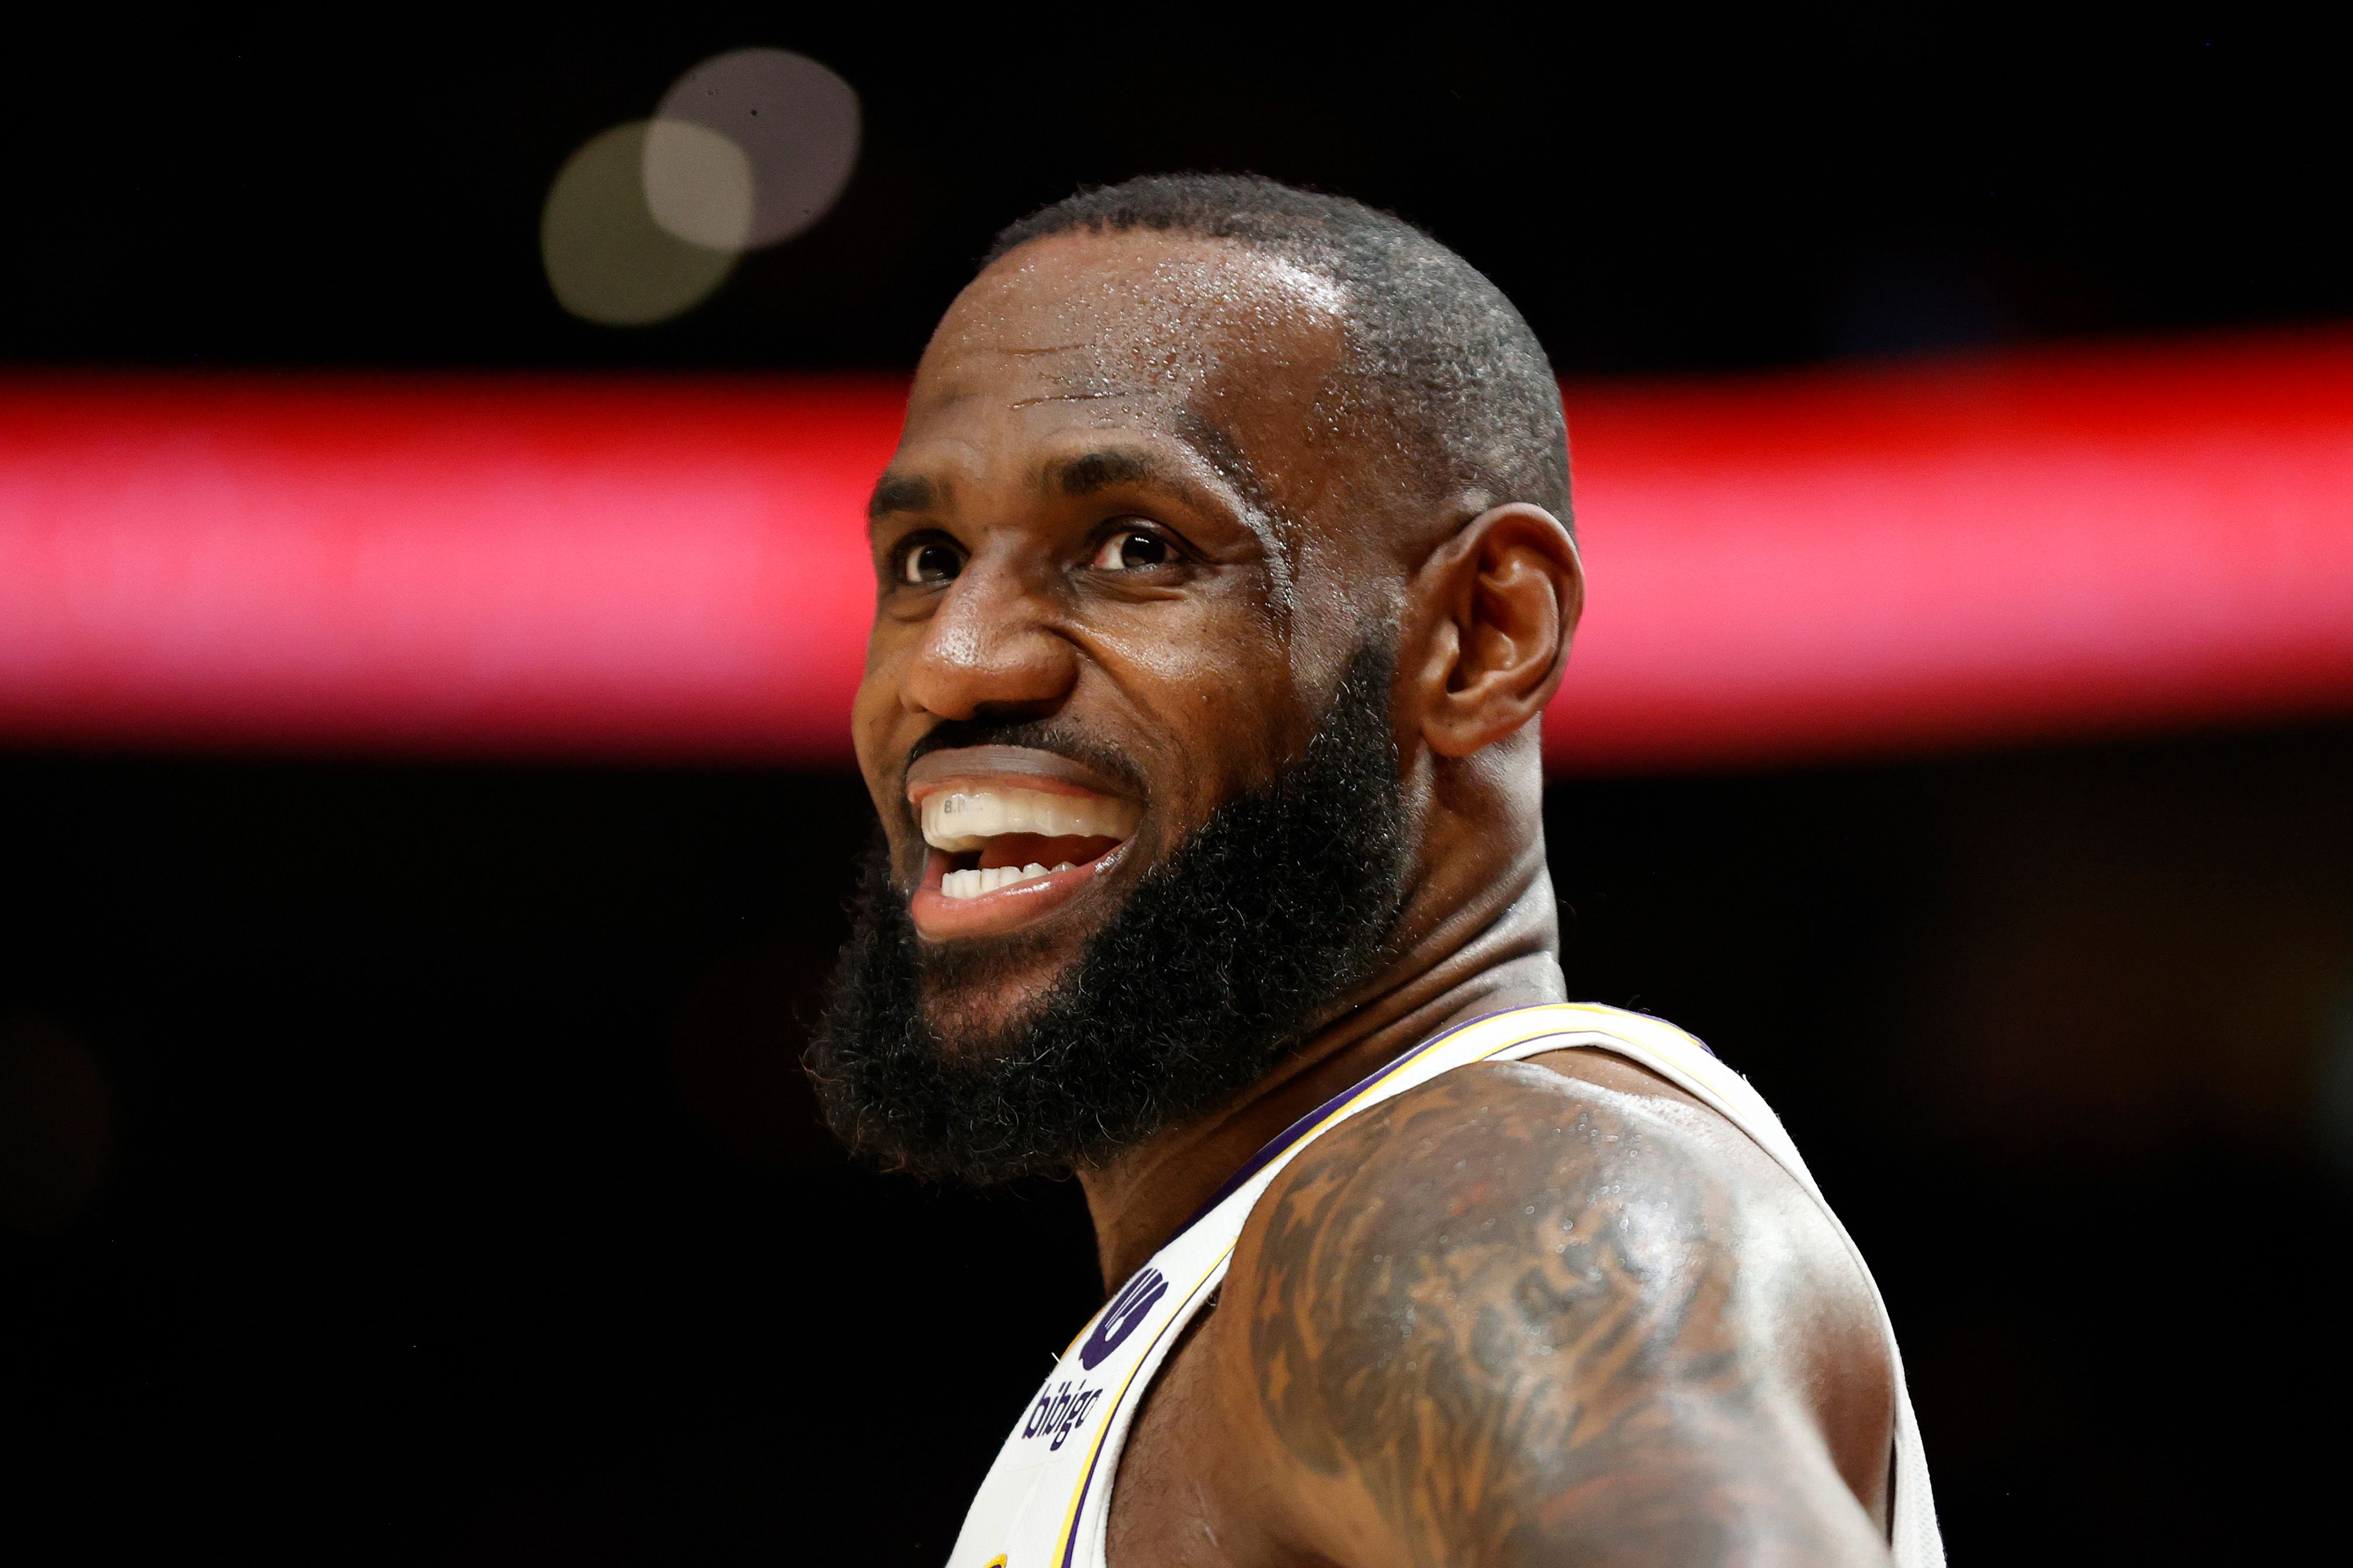 LeBron James Reminds His Wife That No Matter What She Looks Good